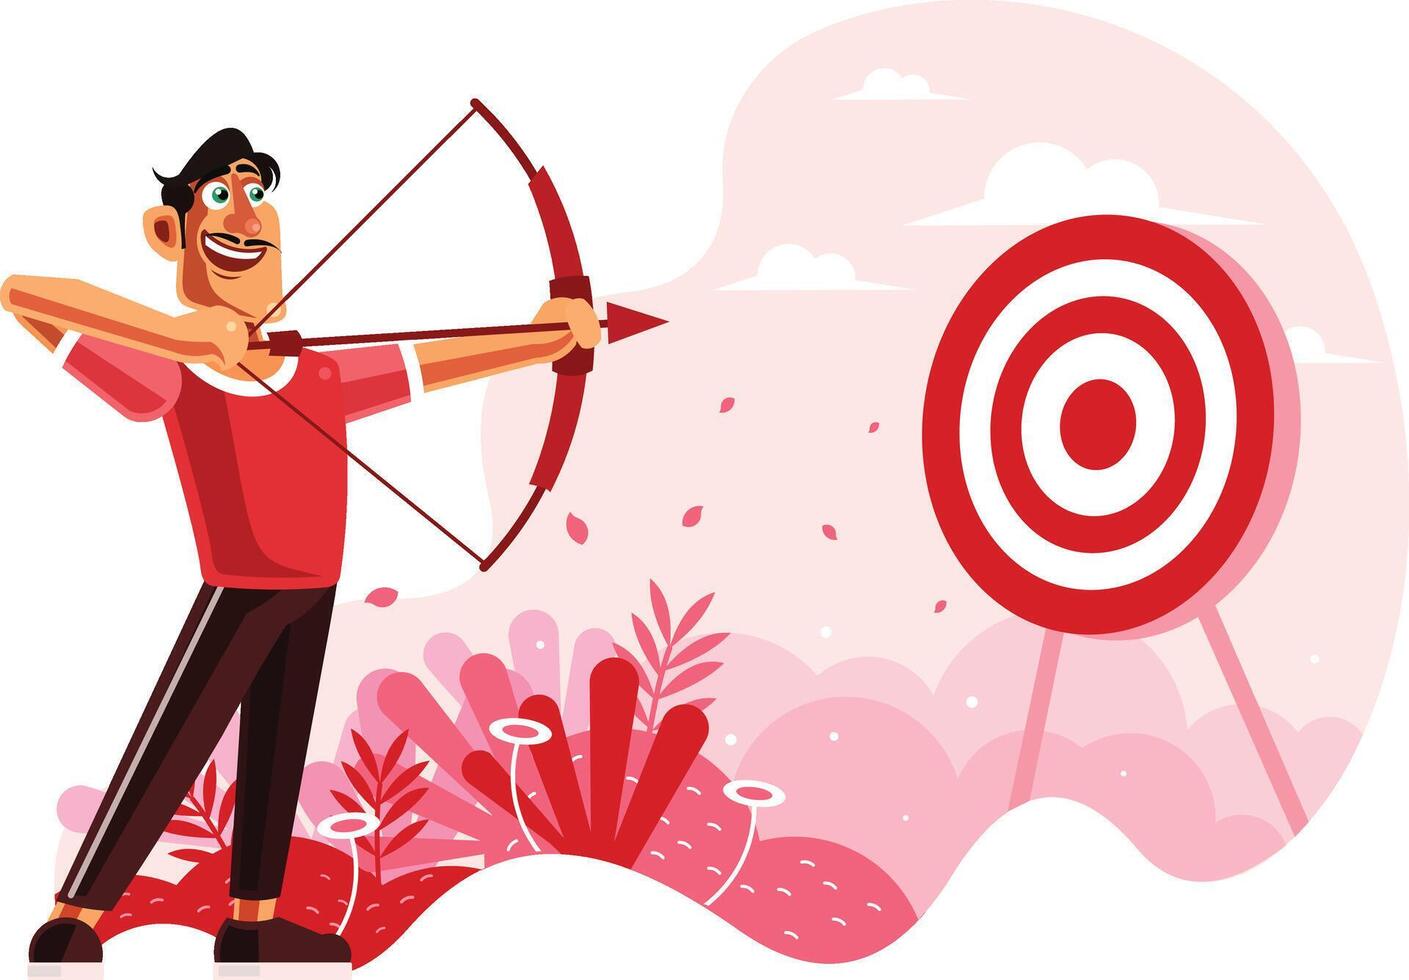 Archer aiming at a target vector